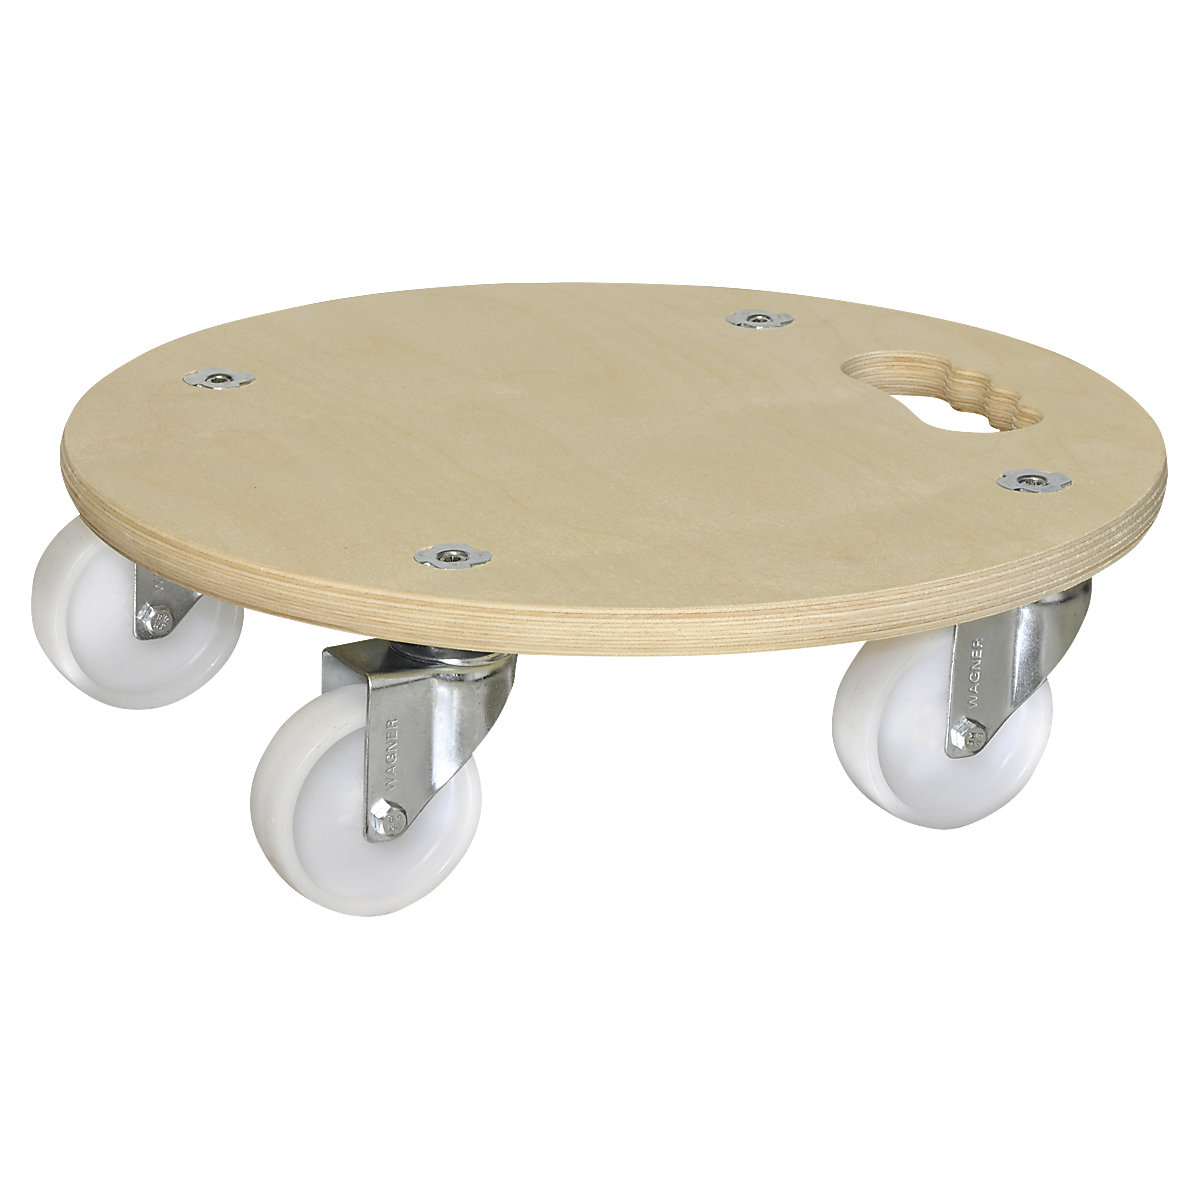 MM 1137 transport dolly, round – Wagner, Ø 380 mm, max. load 250 kg, 5+ items-4